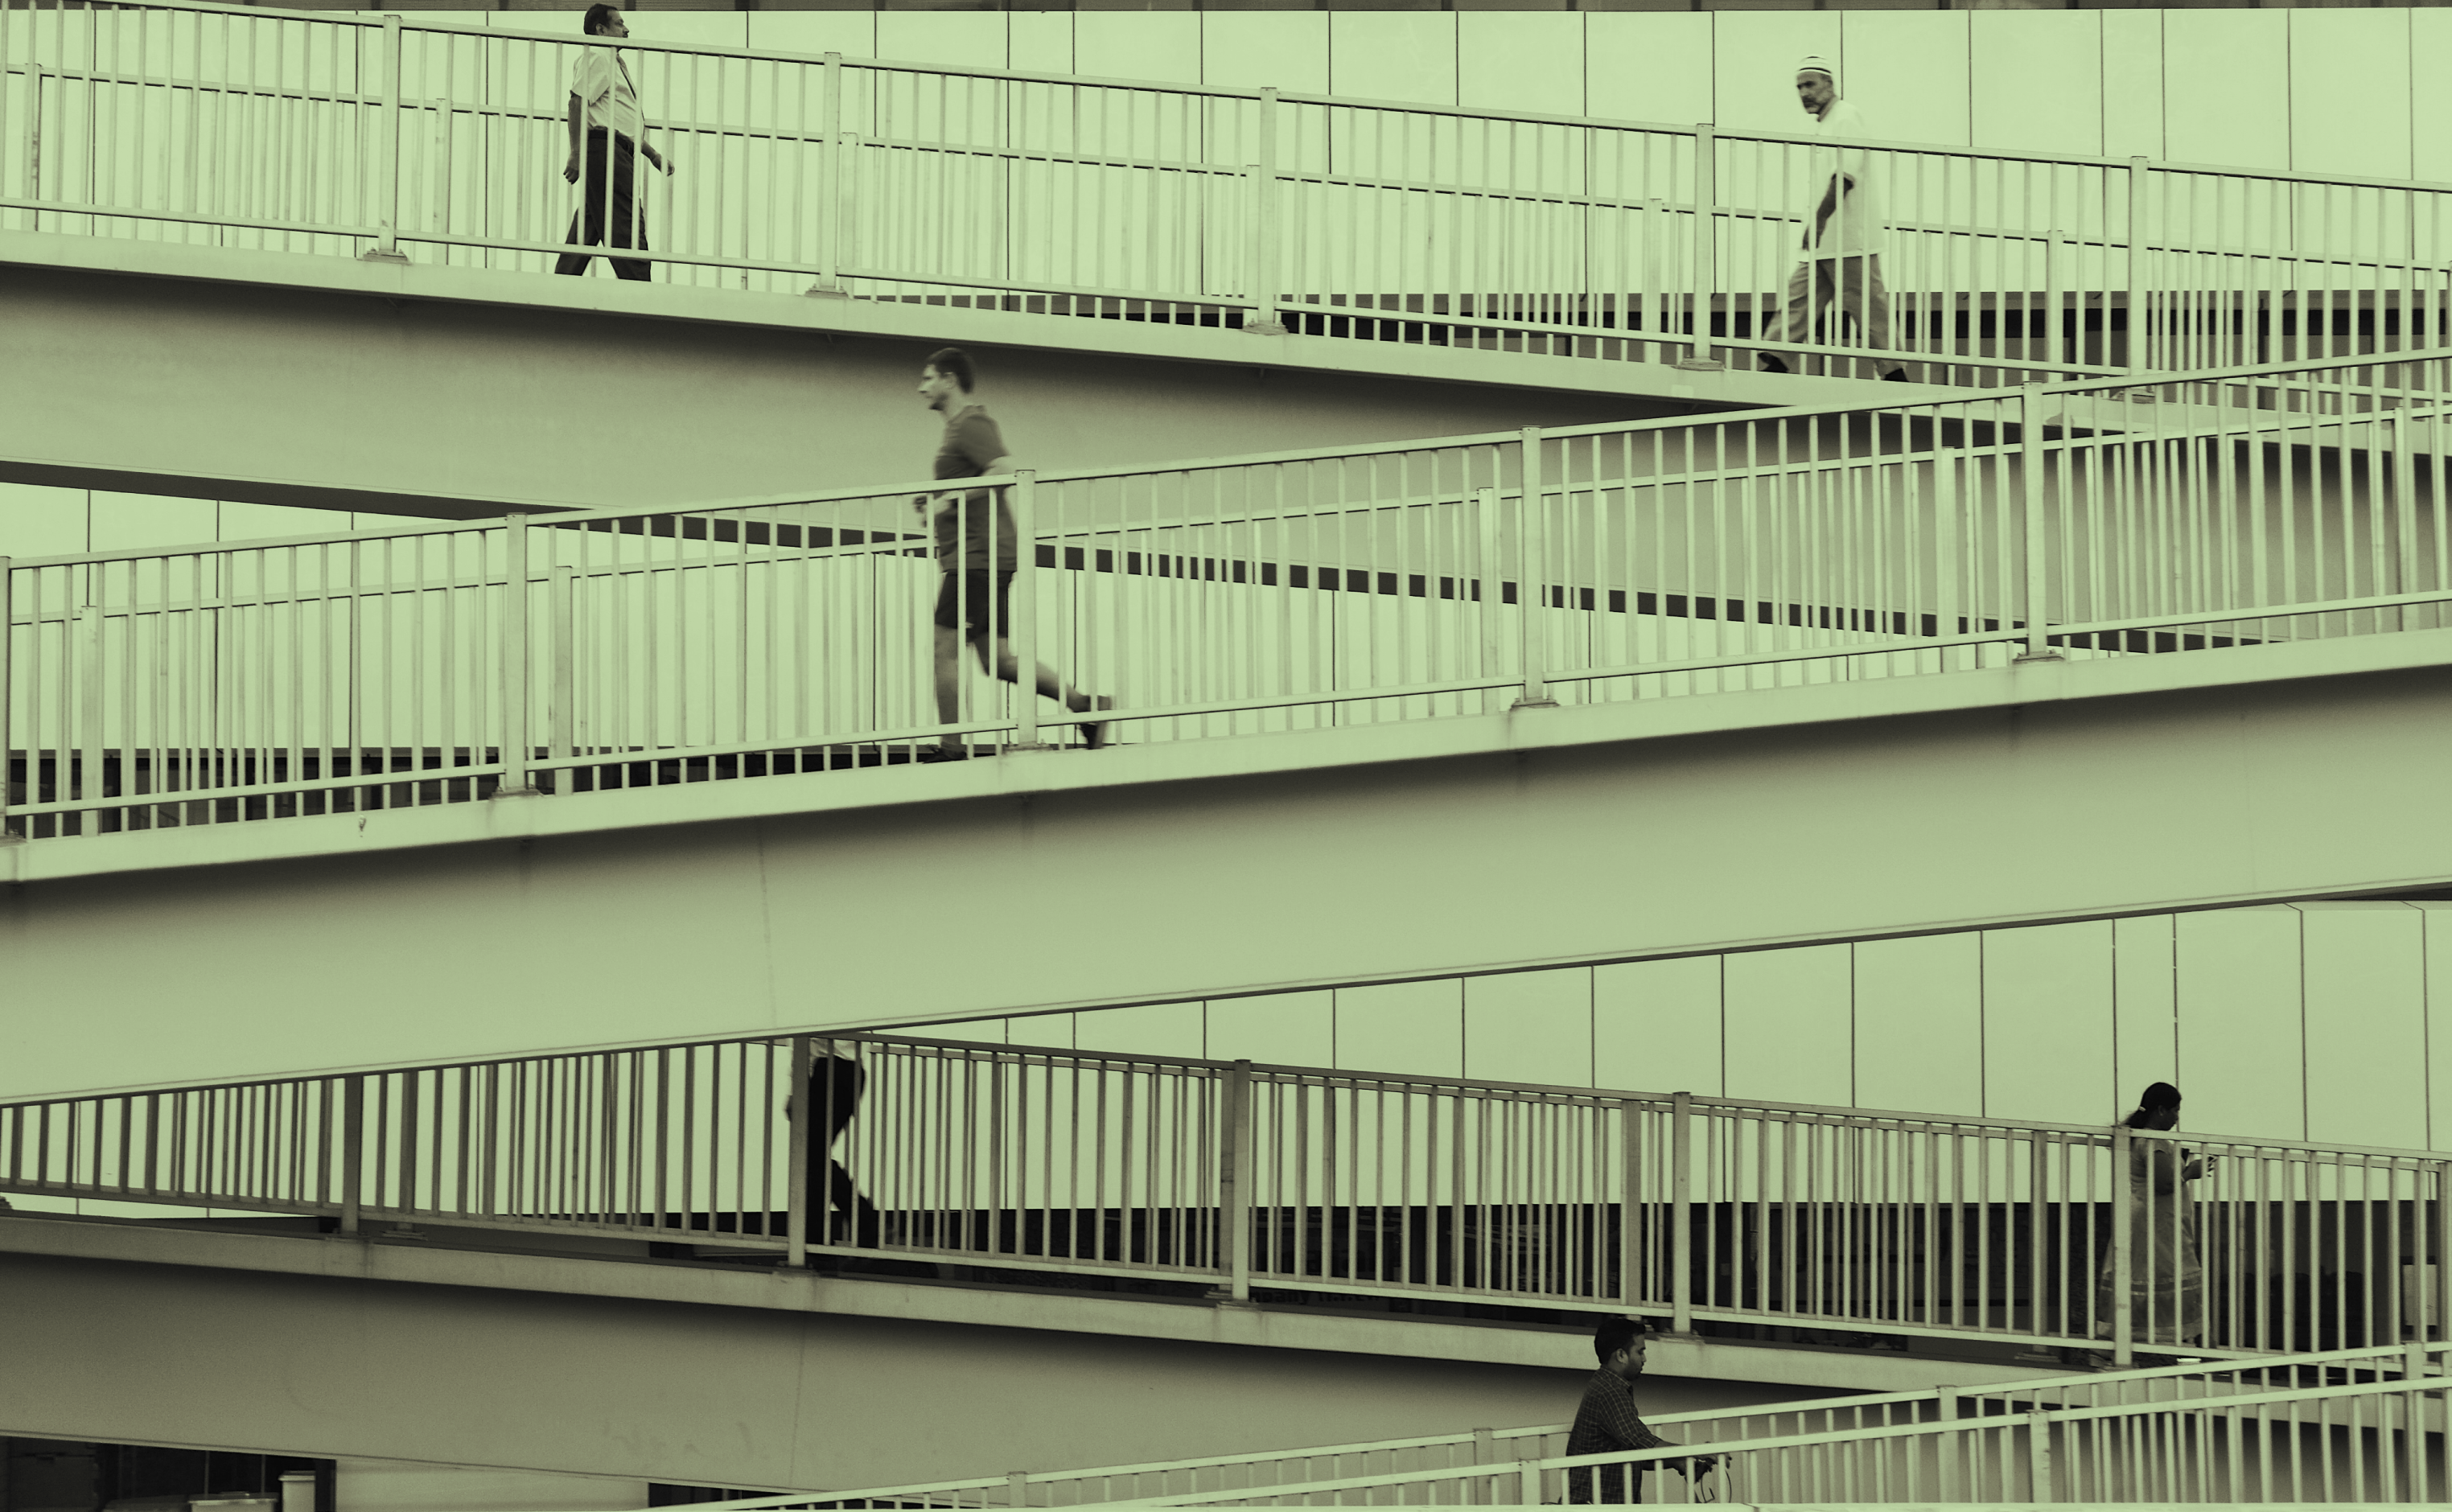 Three straight staircases with four people walking and running on them with a yellow hue overlaying the image.